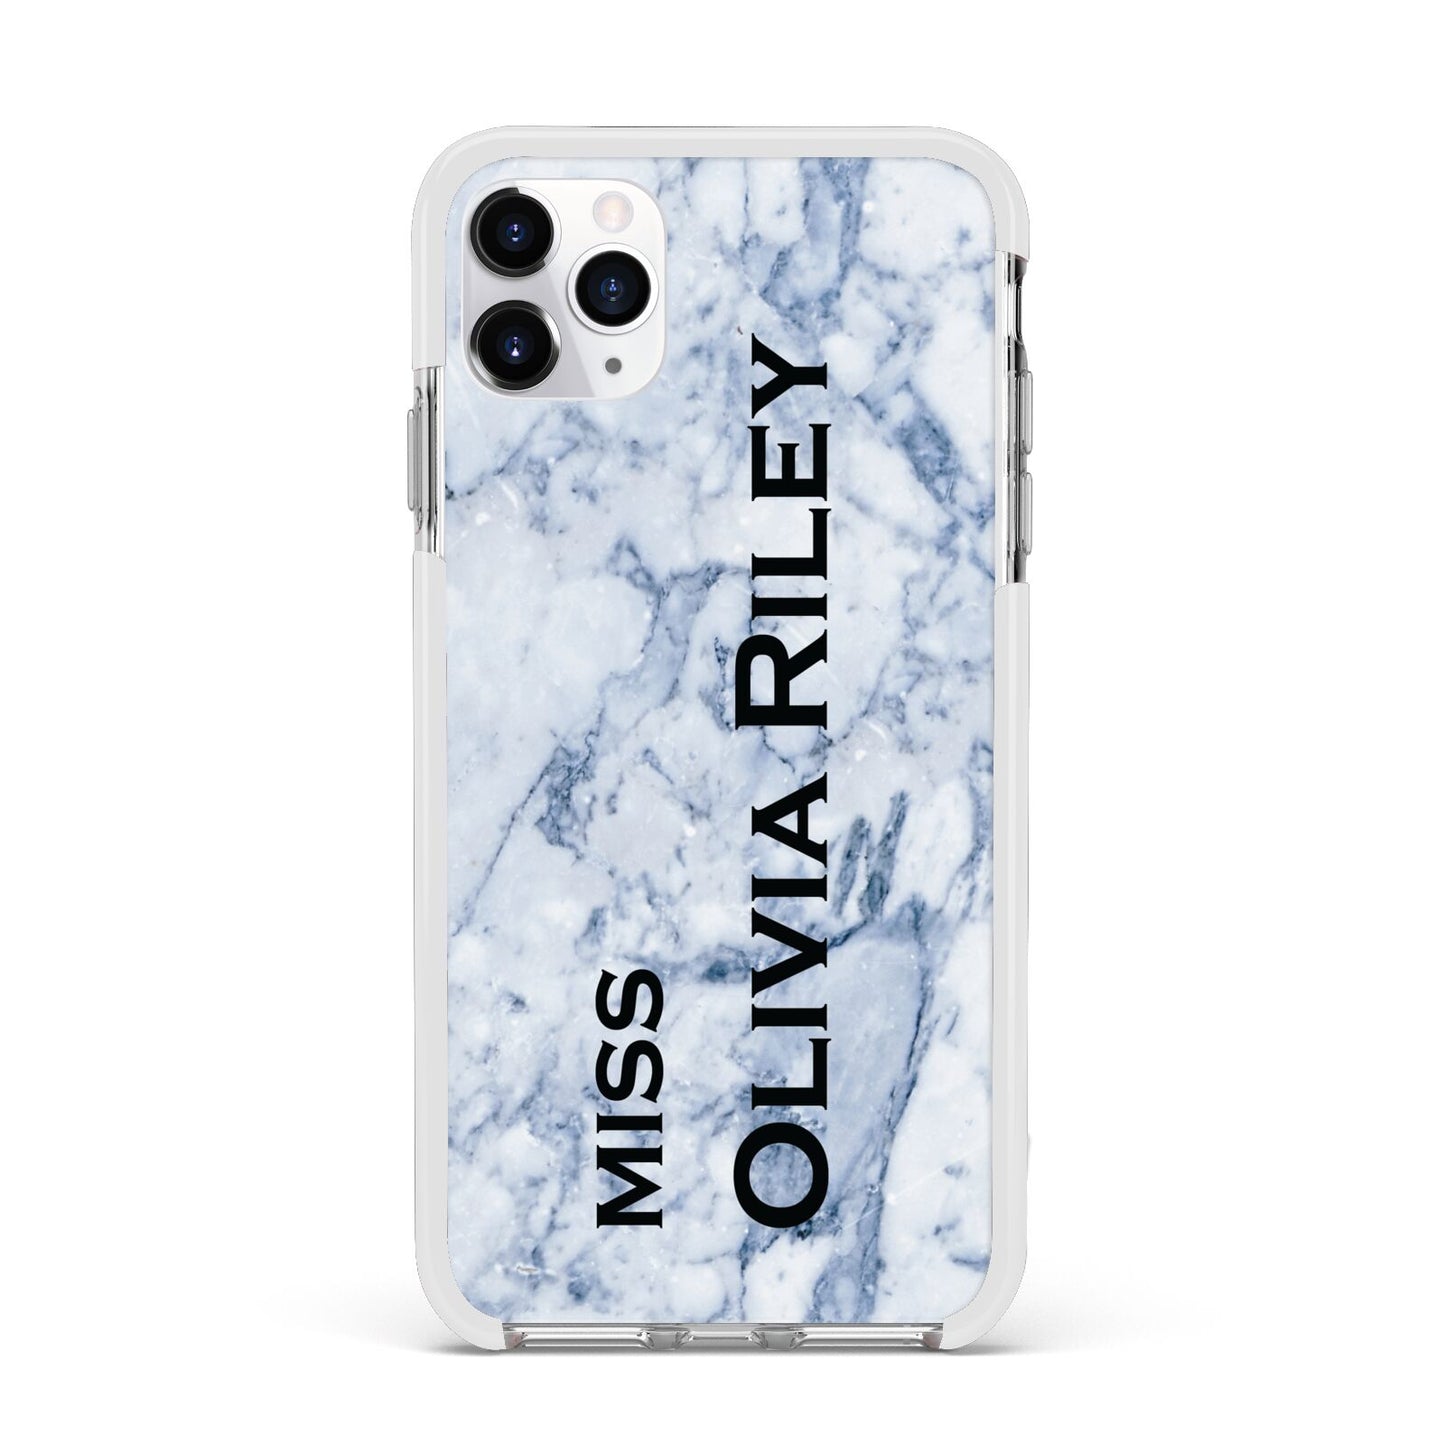 Full Name Grey Marble Apple iPhone 11 Pro Max in Silver with White Impact Case